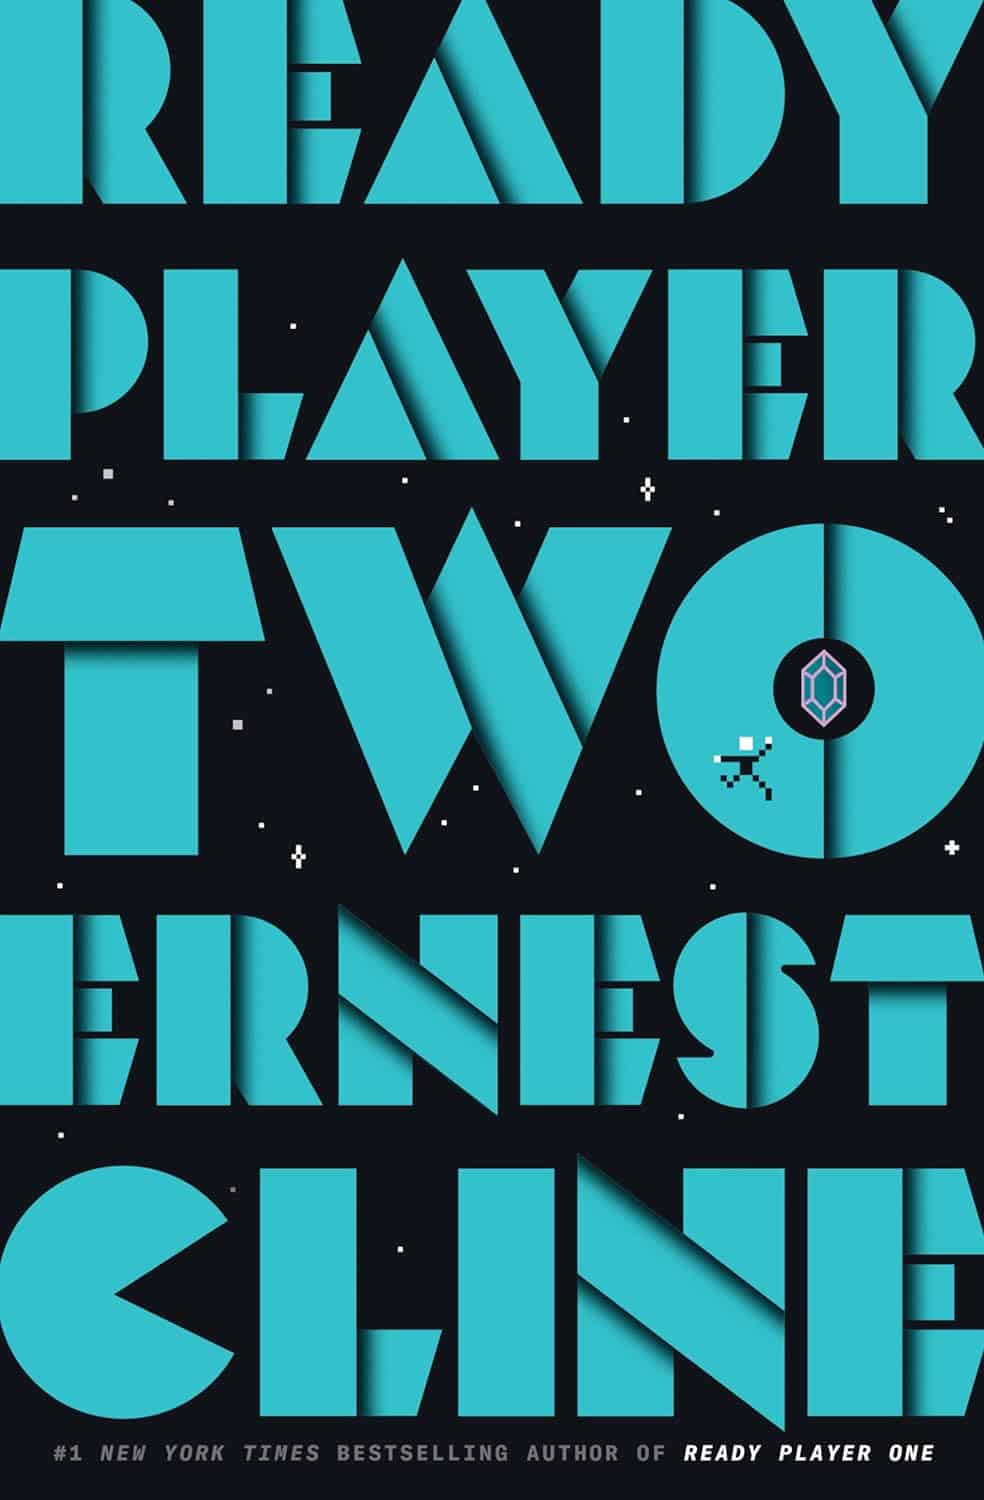 Ready Player Two, by Ernest Cline